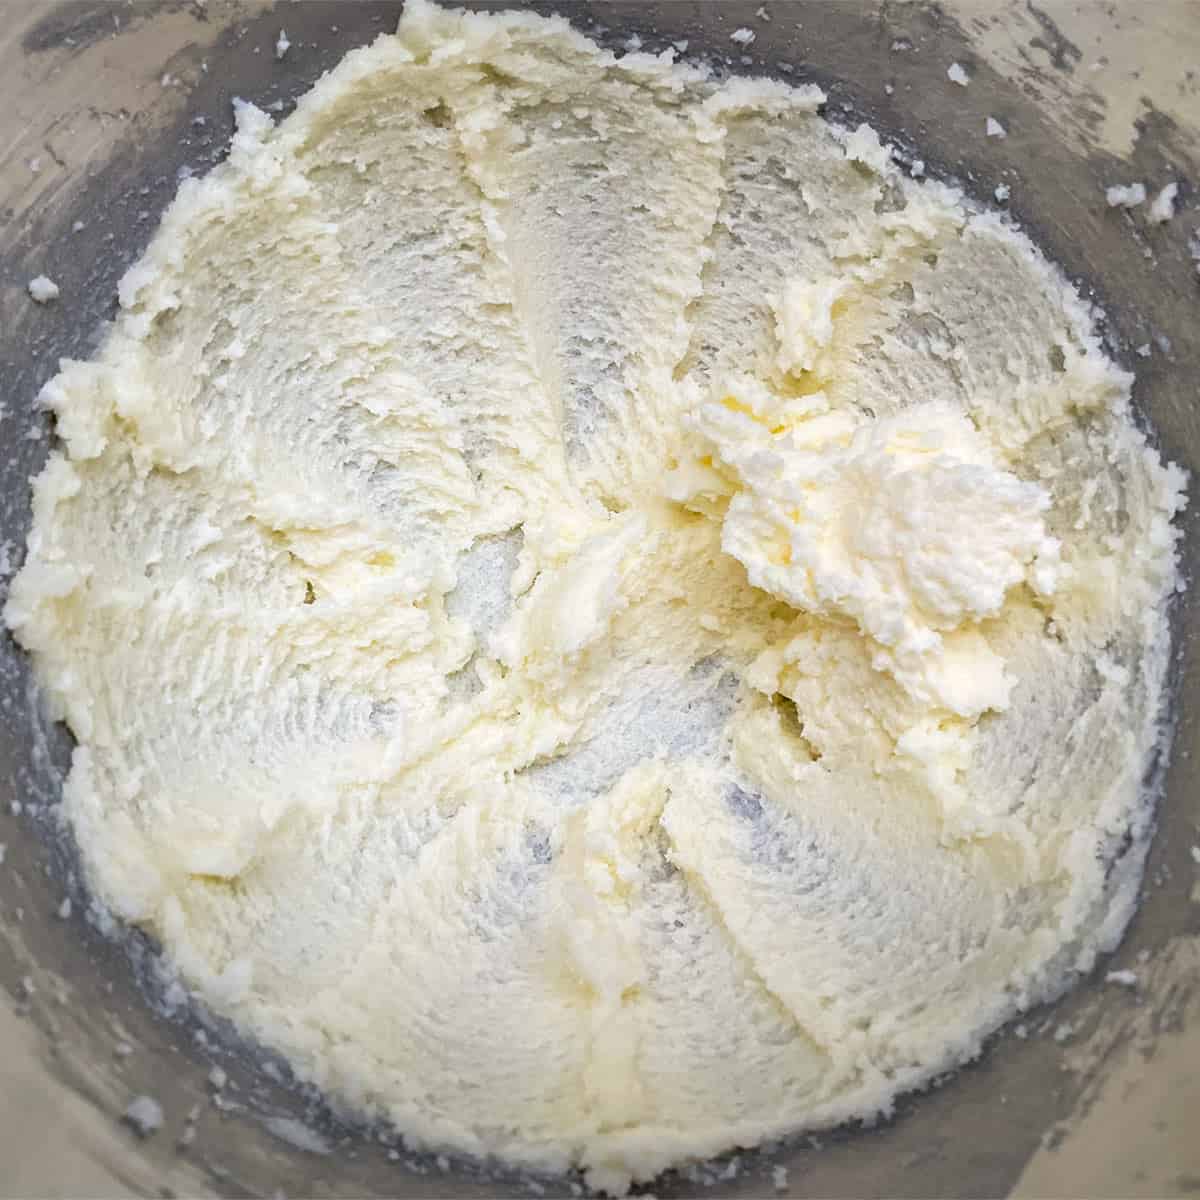 Butter and sugar in a mixer bowl that has been mixed for 3 minutes.